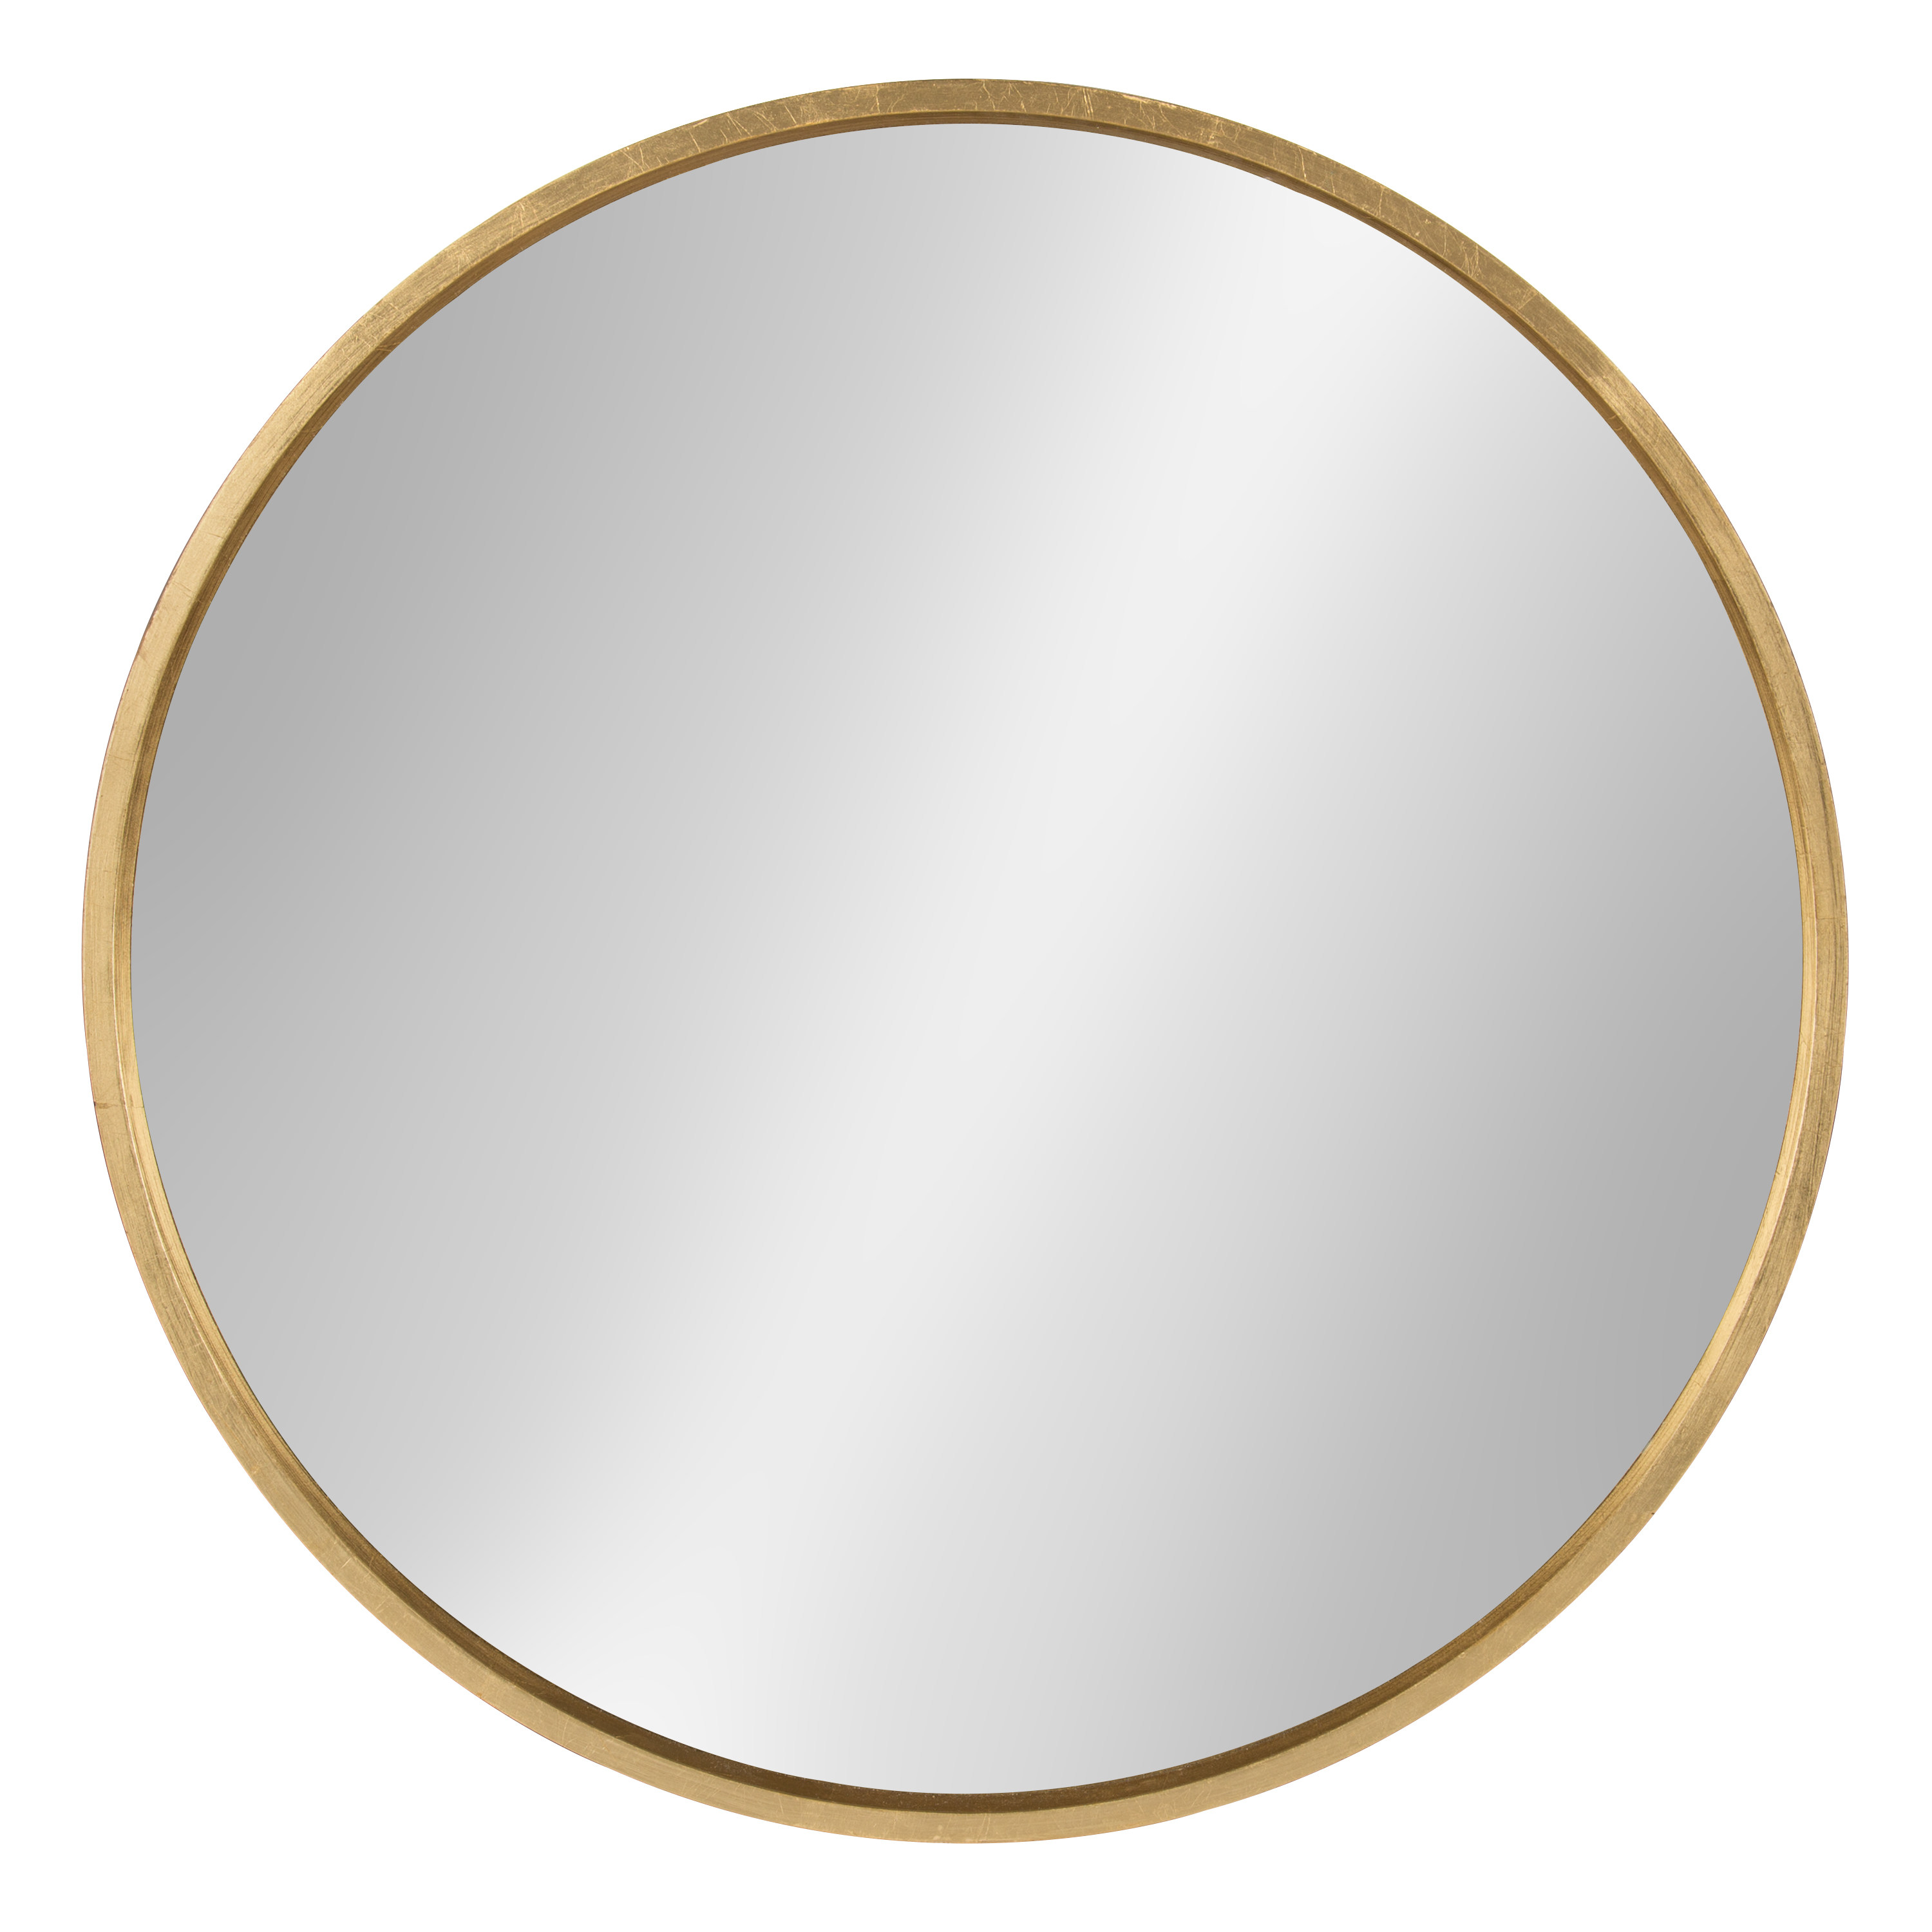 Kate and Laurel Travis Round Wood Wall Mirror, 25.6